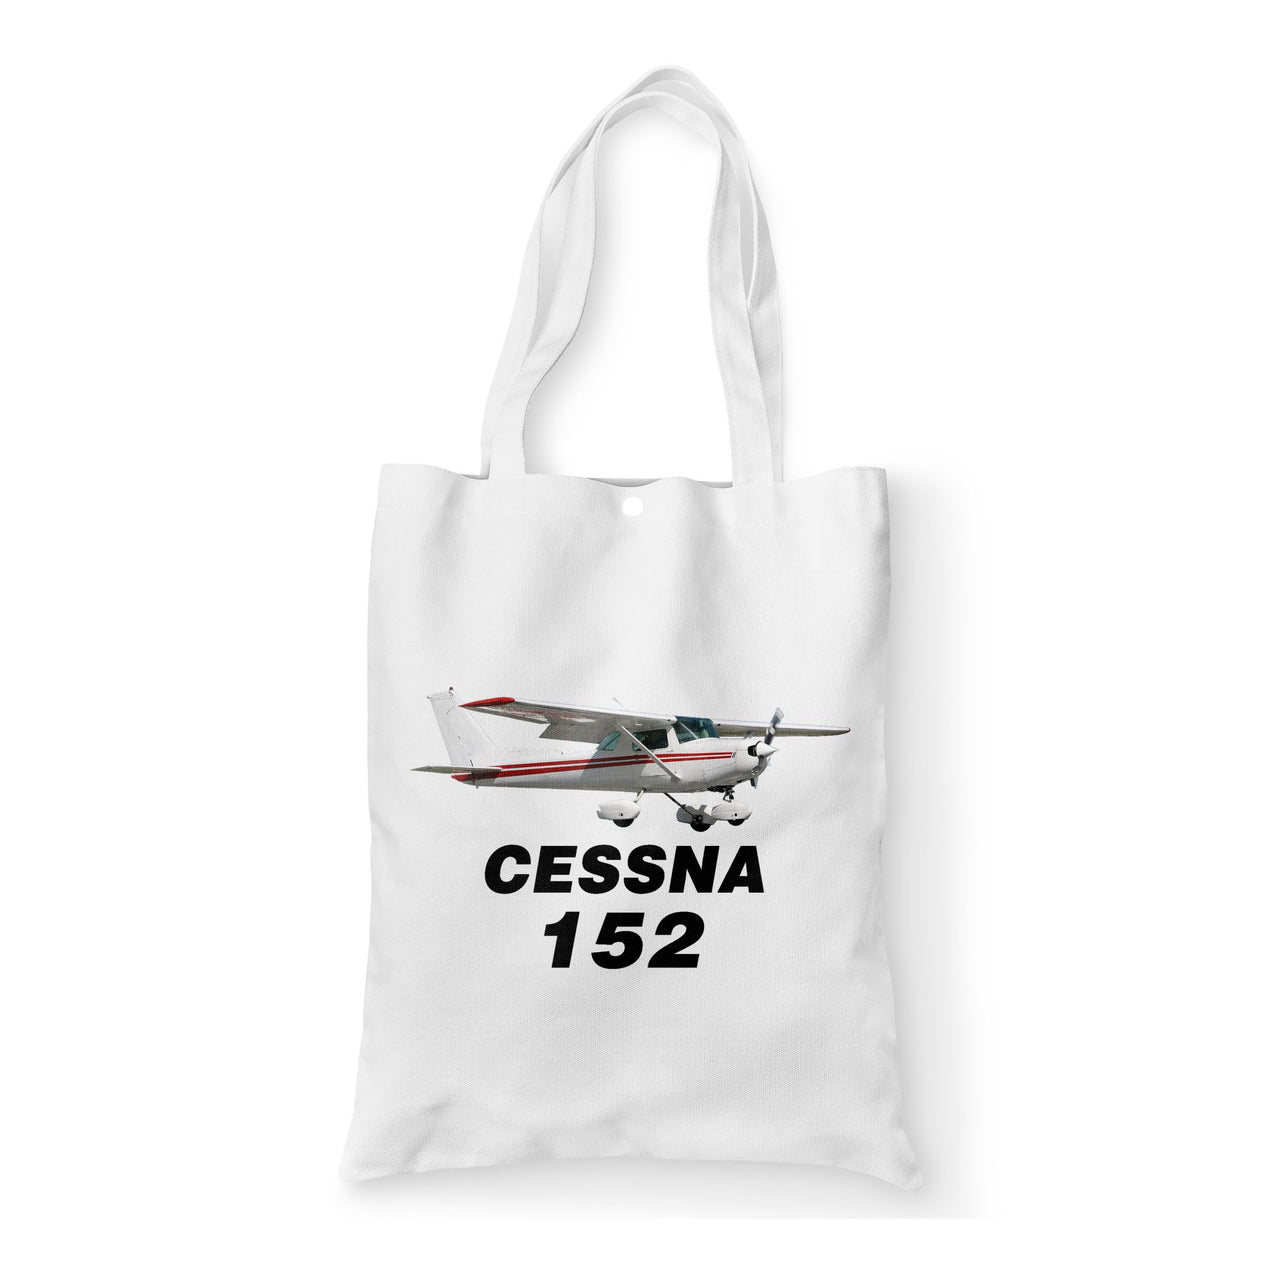 The Cessna 152 Designed Tote Bags